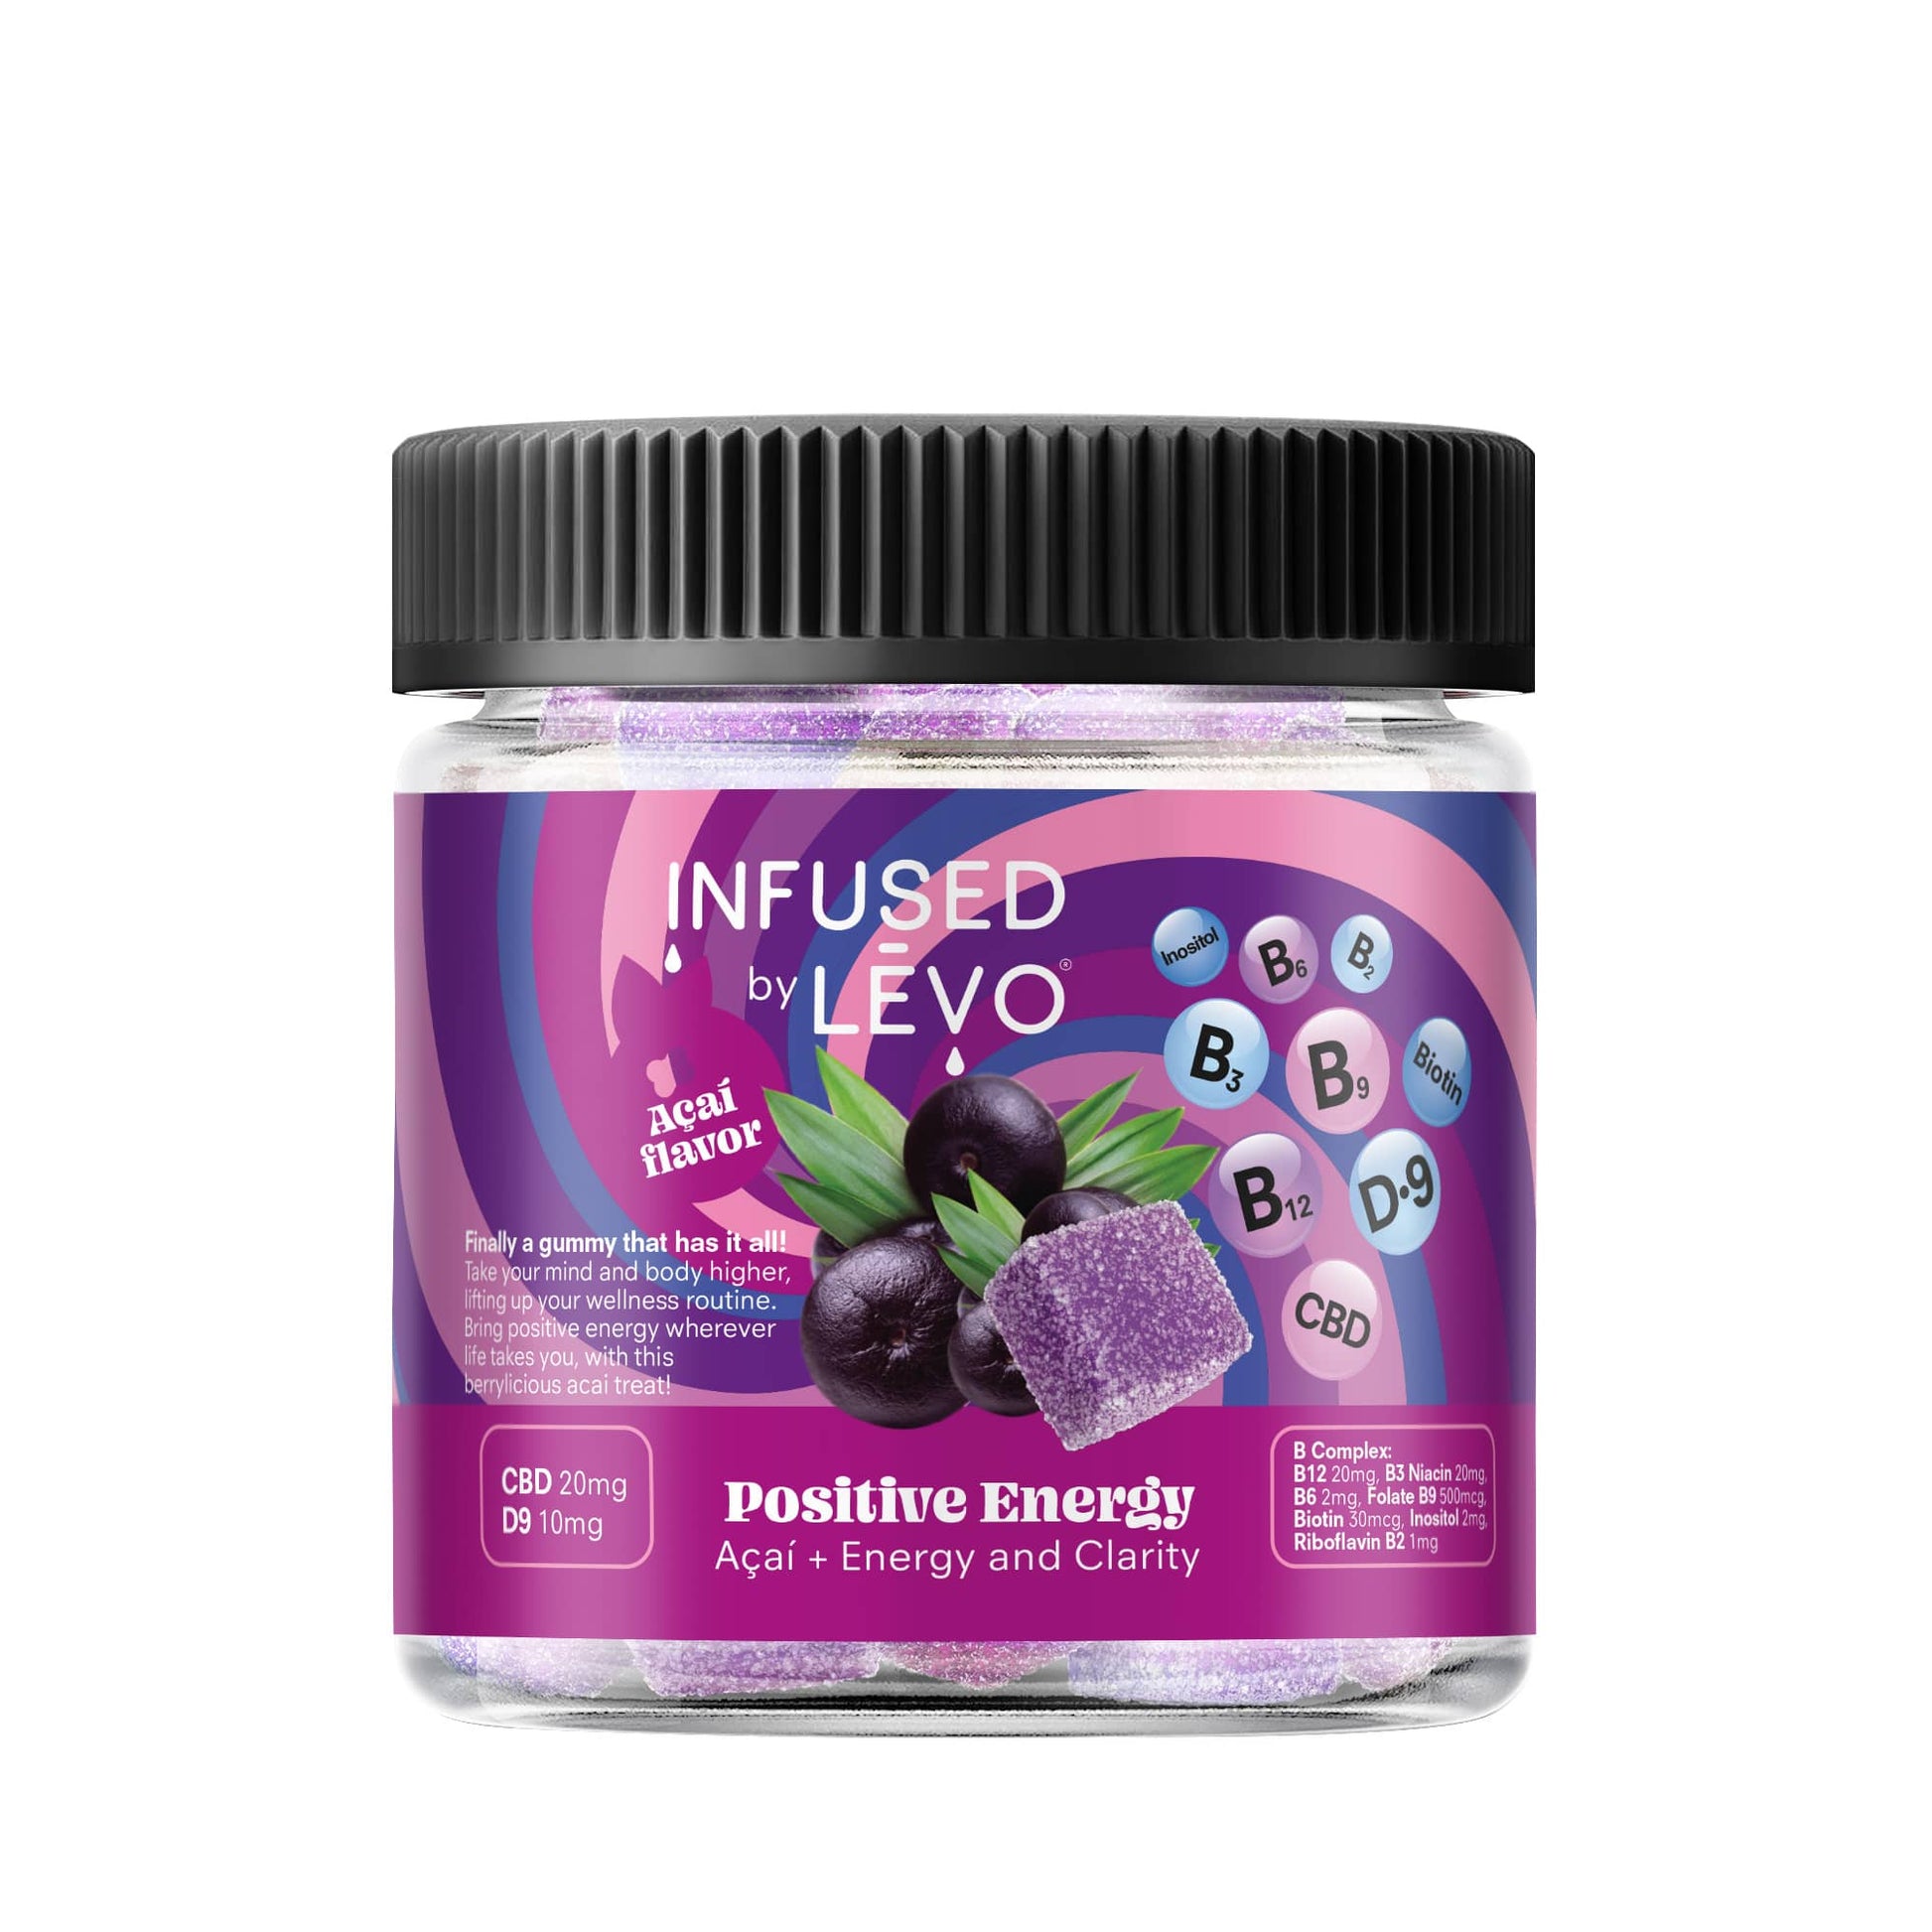 Infused by LEVO Positive Energy Gummies acai flavored for energy and clarity. Closed bottle.